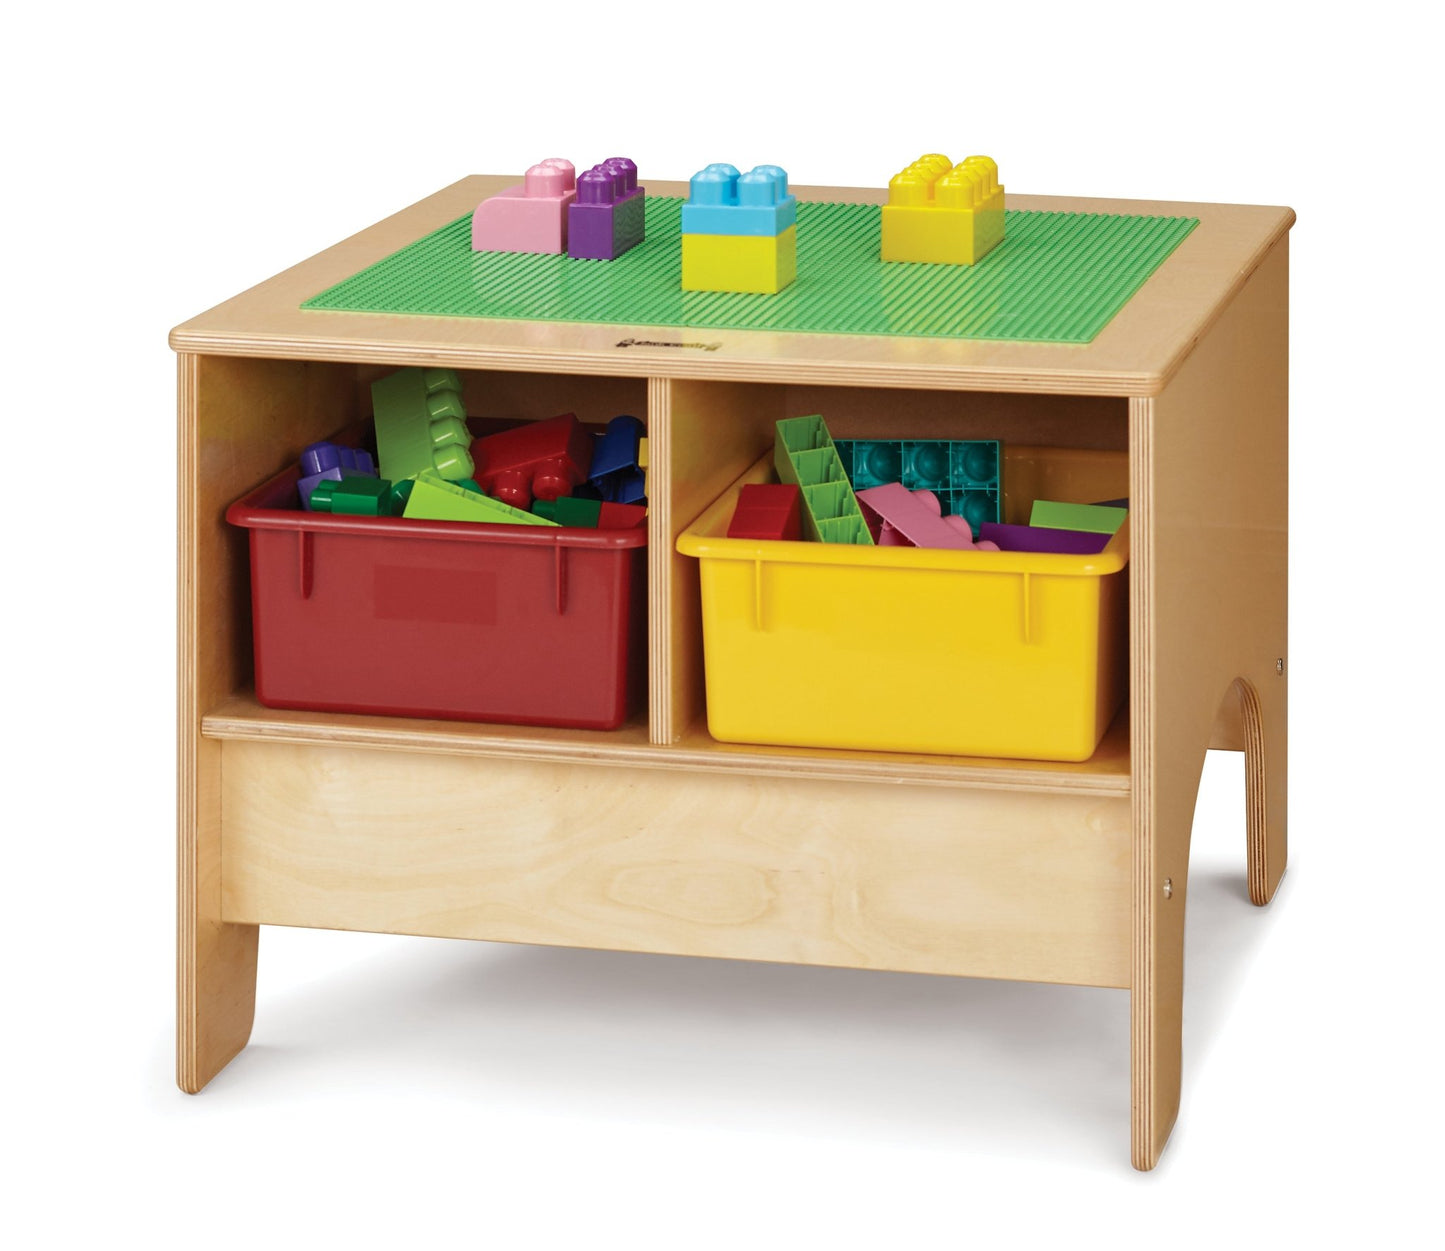 Jonti-Craft Building Table With Duplo Compatible Top- Colored Storage Tubs (Jonti-Craft JON-57459JC) - SchoolOutlet